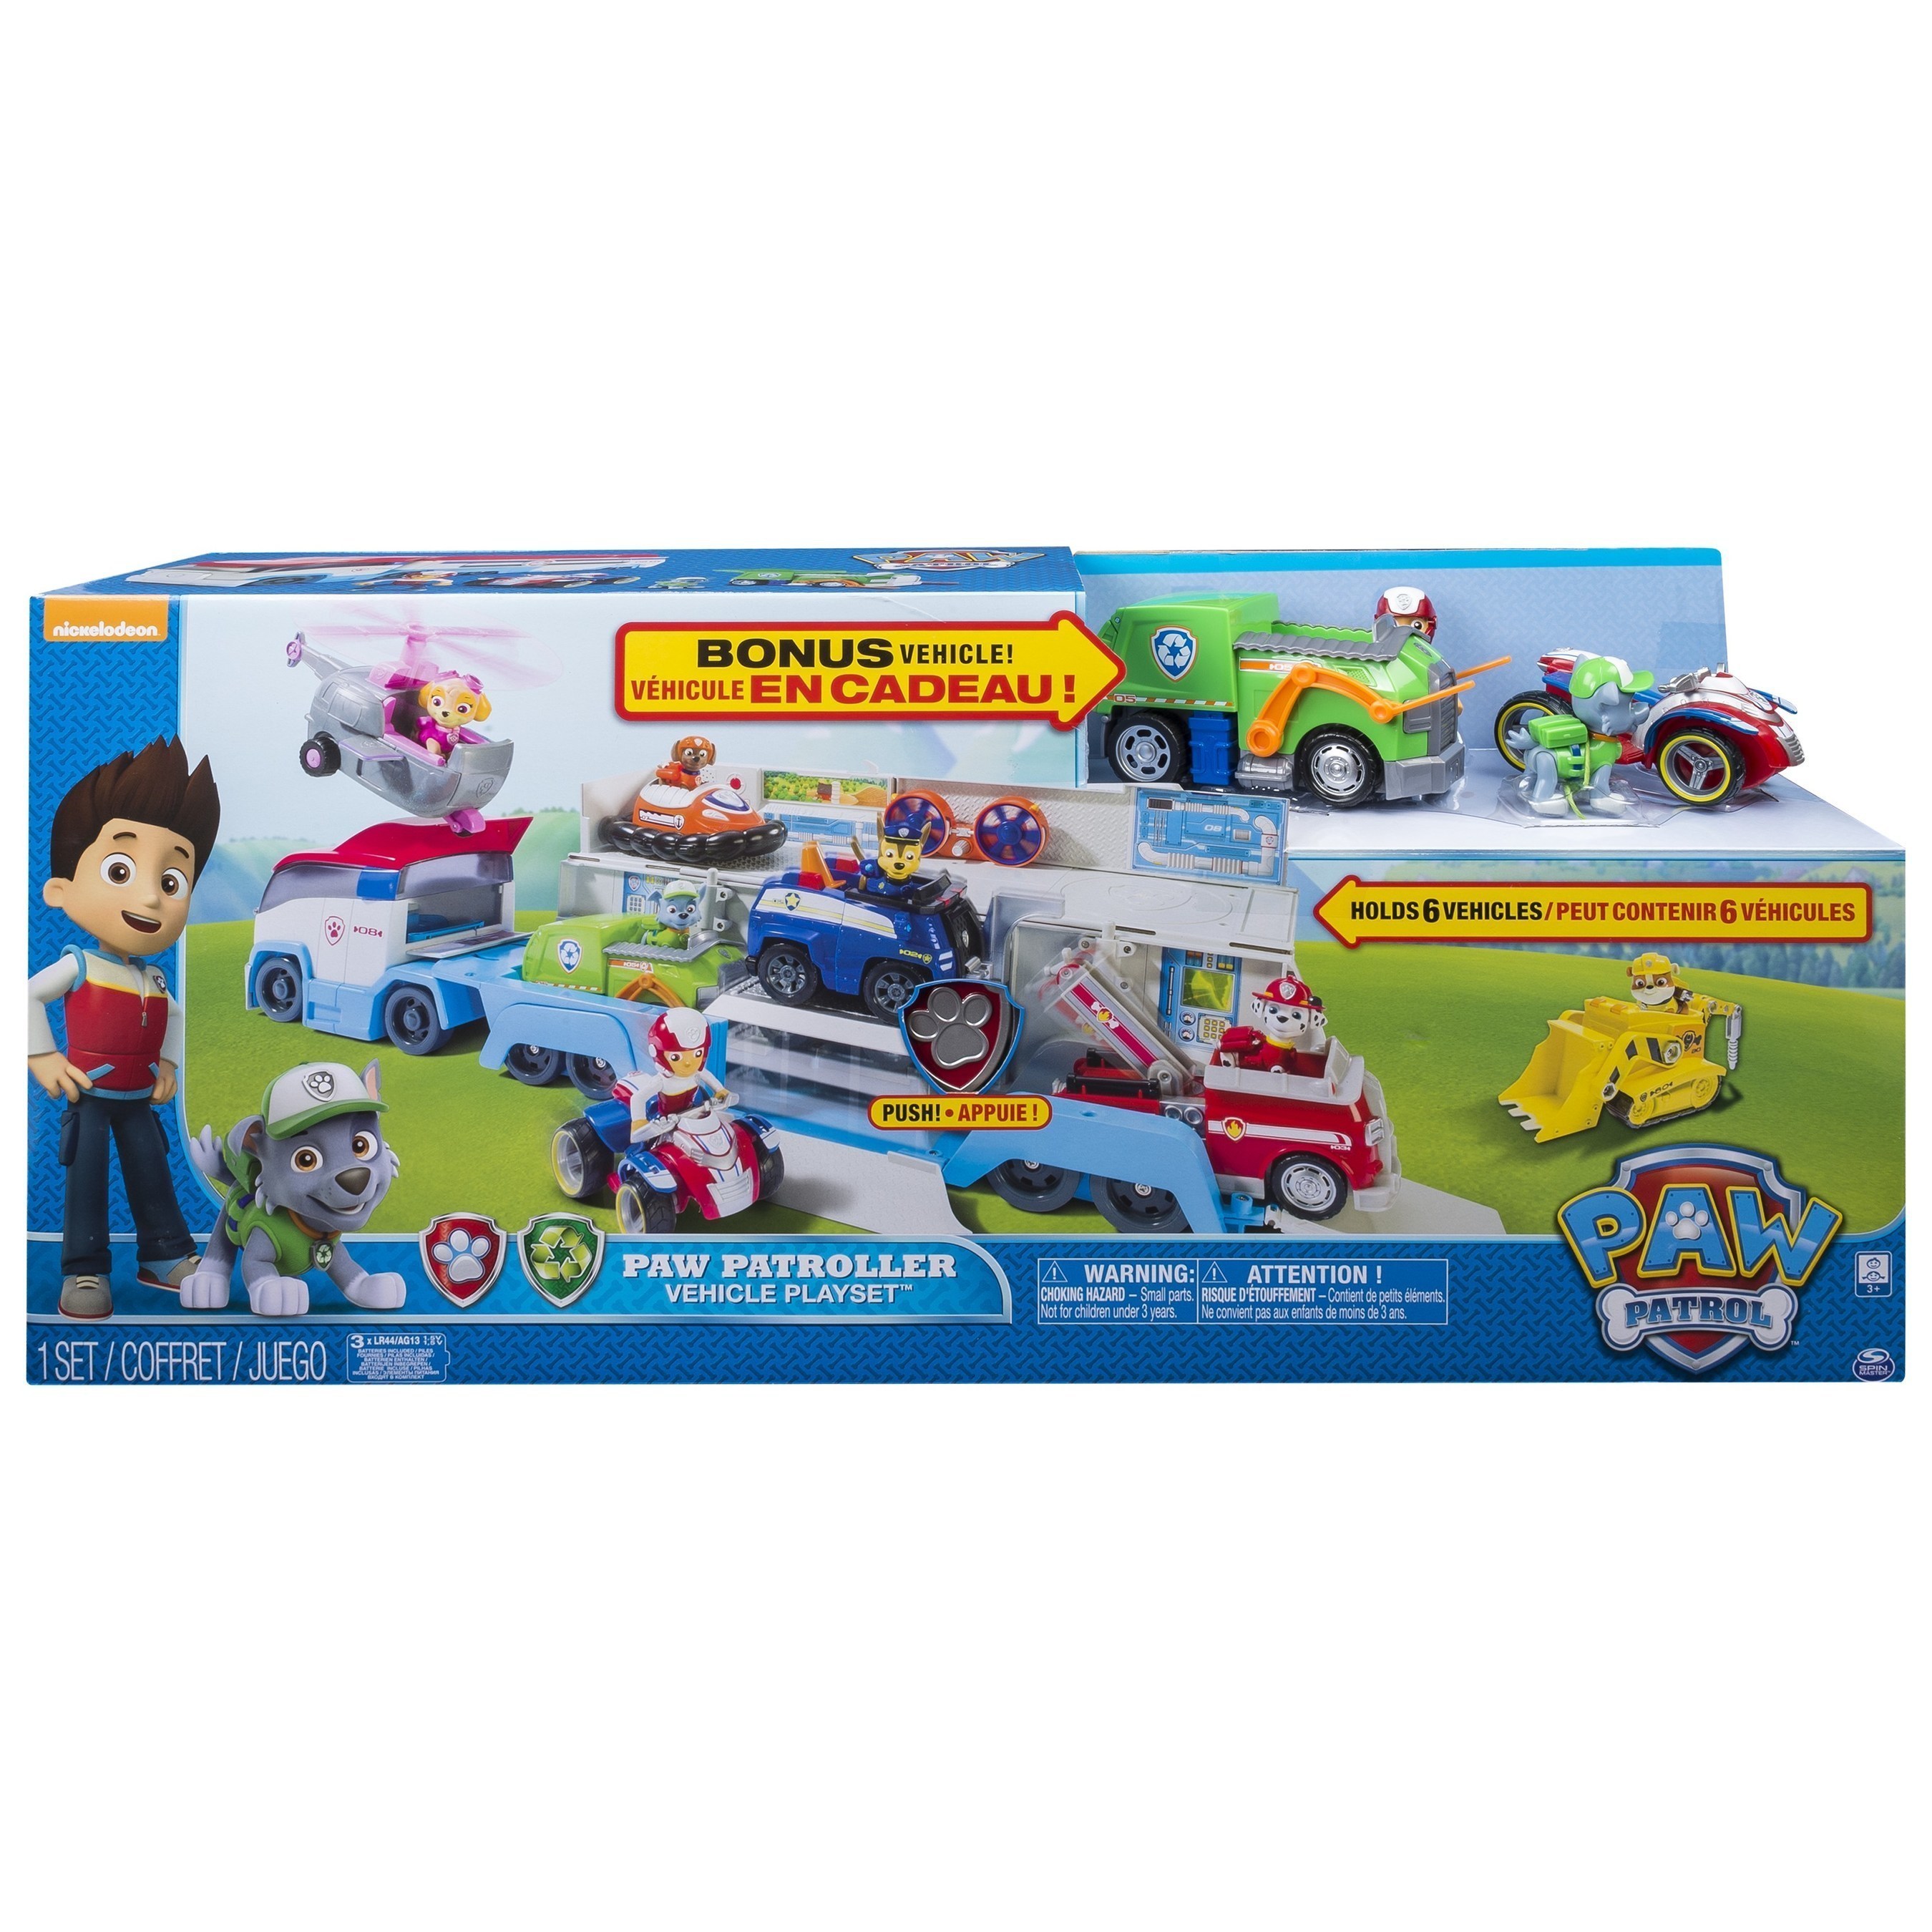 PAW Patroller Vehicle Playset with BONUS Vehicle, available at BJ's Clubs and BJs.com.